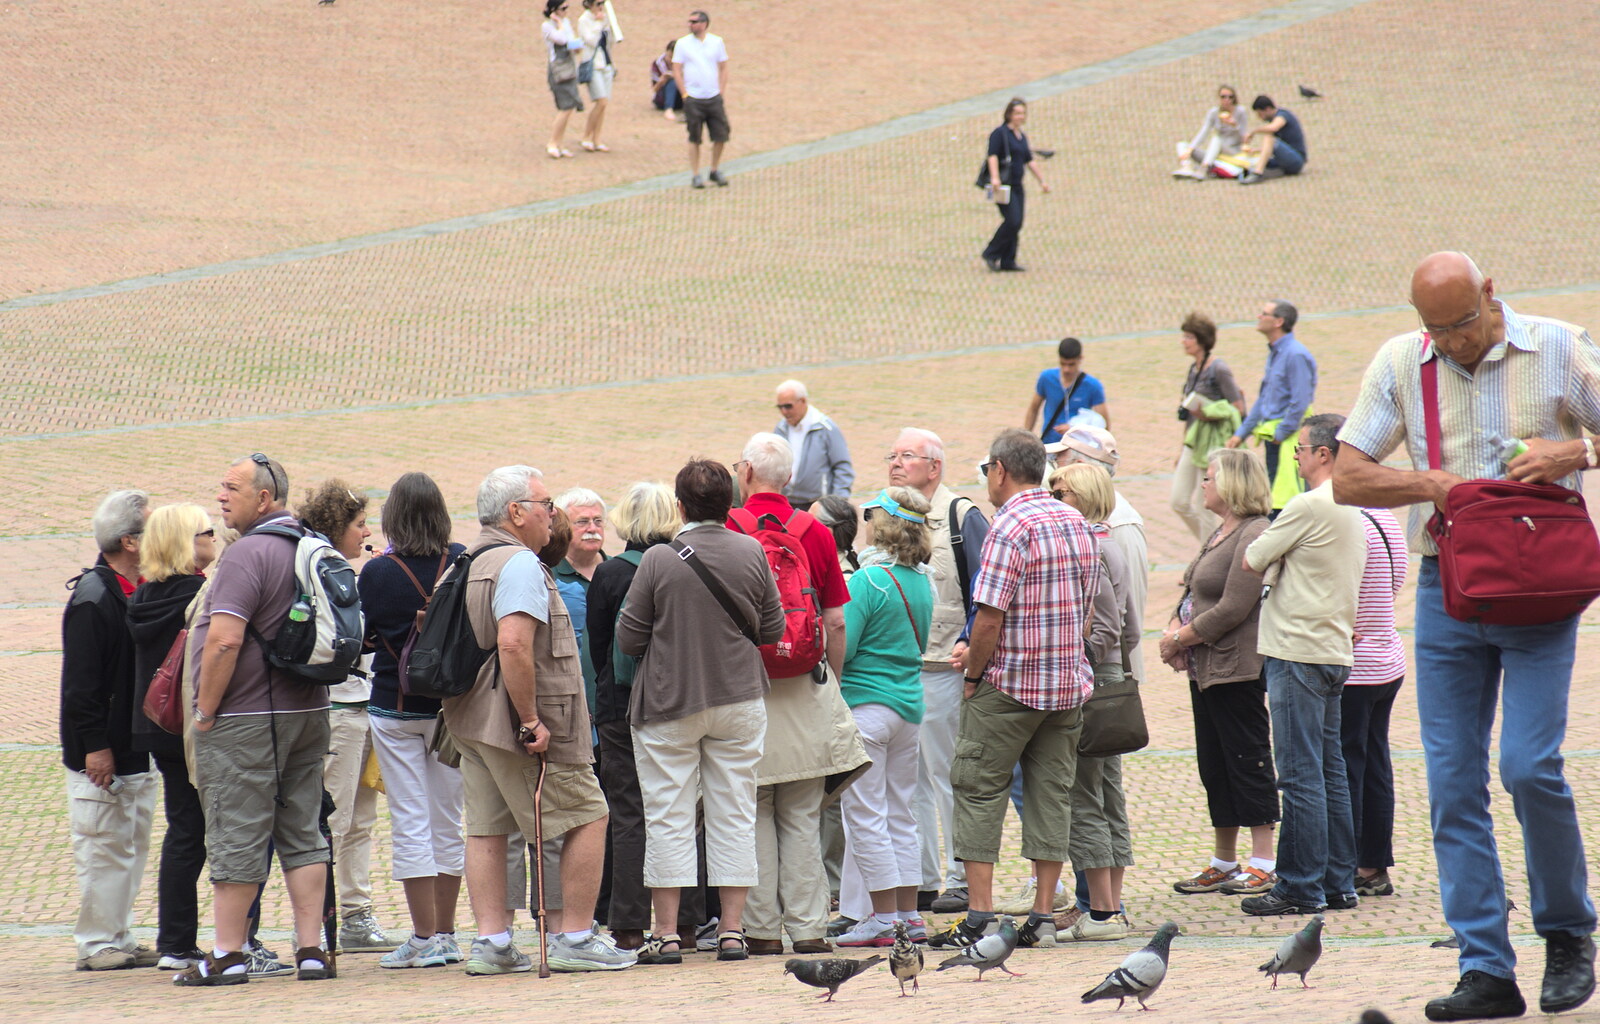 A Tuscan Winery and a Trip to Siena, Tuscany, Italy - 10th June 2013: A flock of tourists